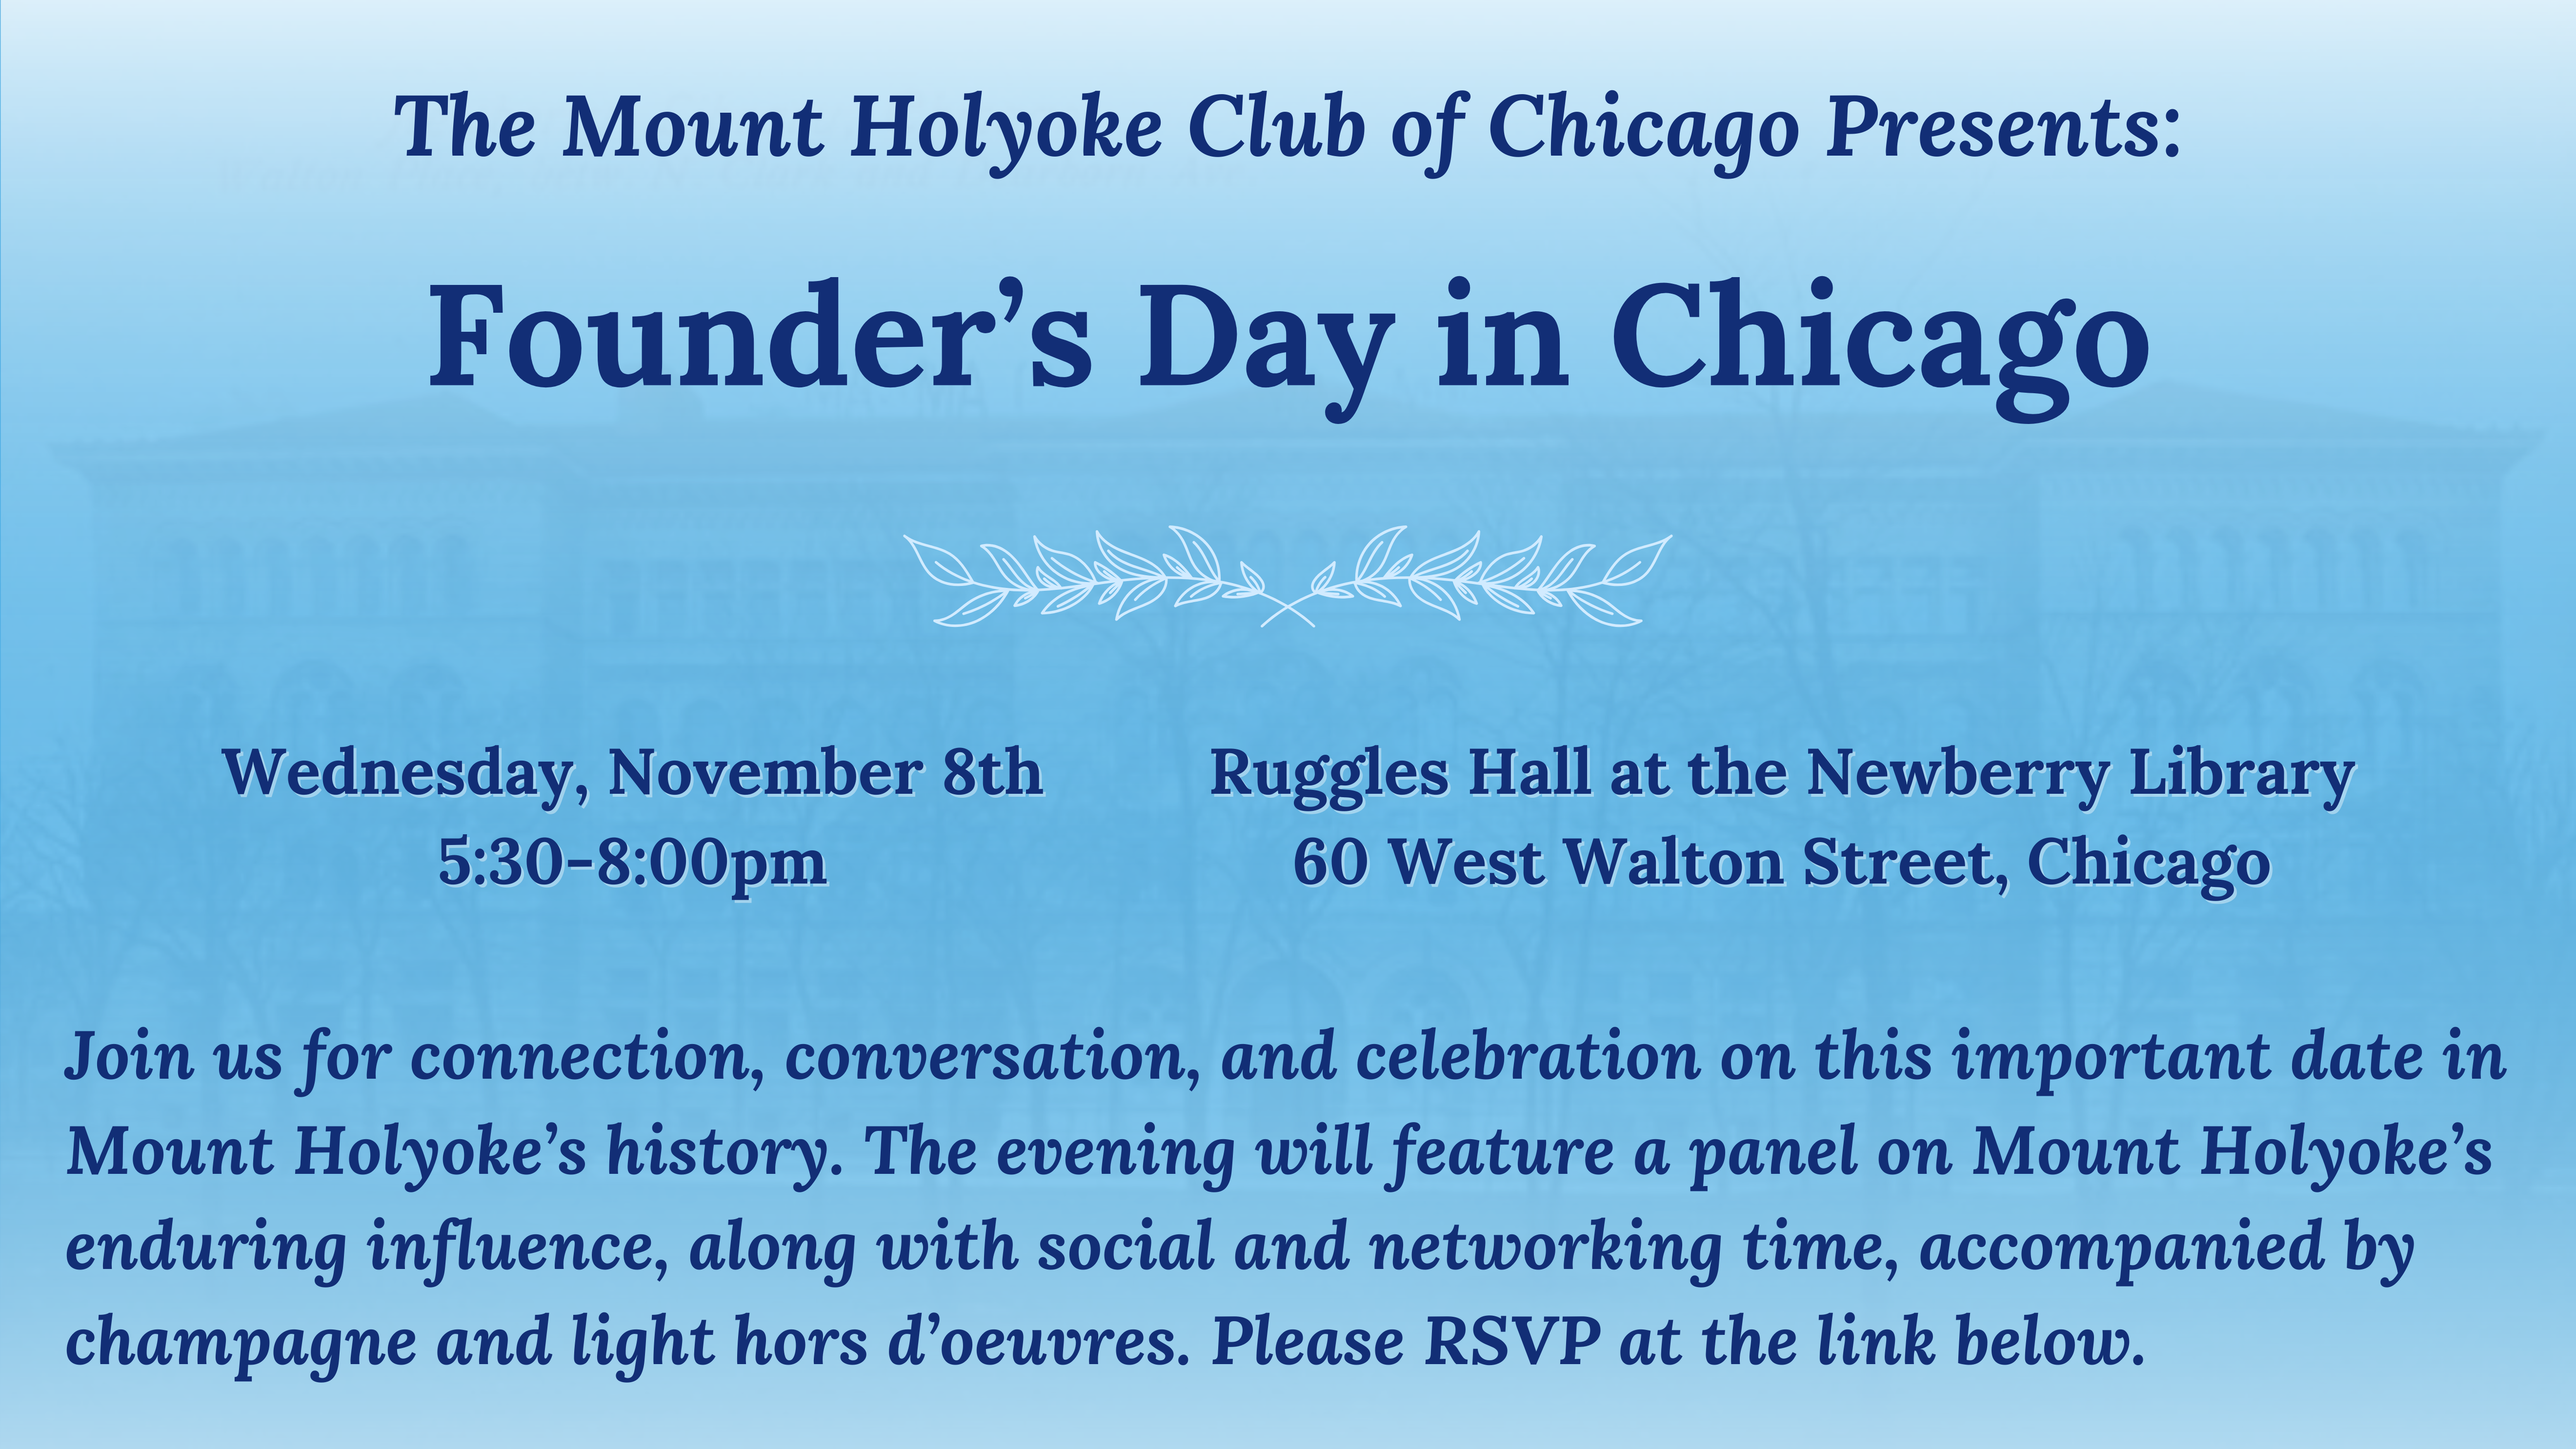 Graphic announcing Founder's Day event on November 8, 2023, 5:30-8pm, at the Newberry Library. Blurb at bottom says "Join us for connection, conversation, and celebration on this important date in Mount Holyoke’s history. The evening will feature a panel on Mount Holyoke’s enduring influence, along with social and networking time, accompanied by champagne and light hors d’oeuvres. Please RSVP at the link below."